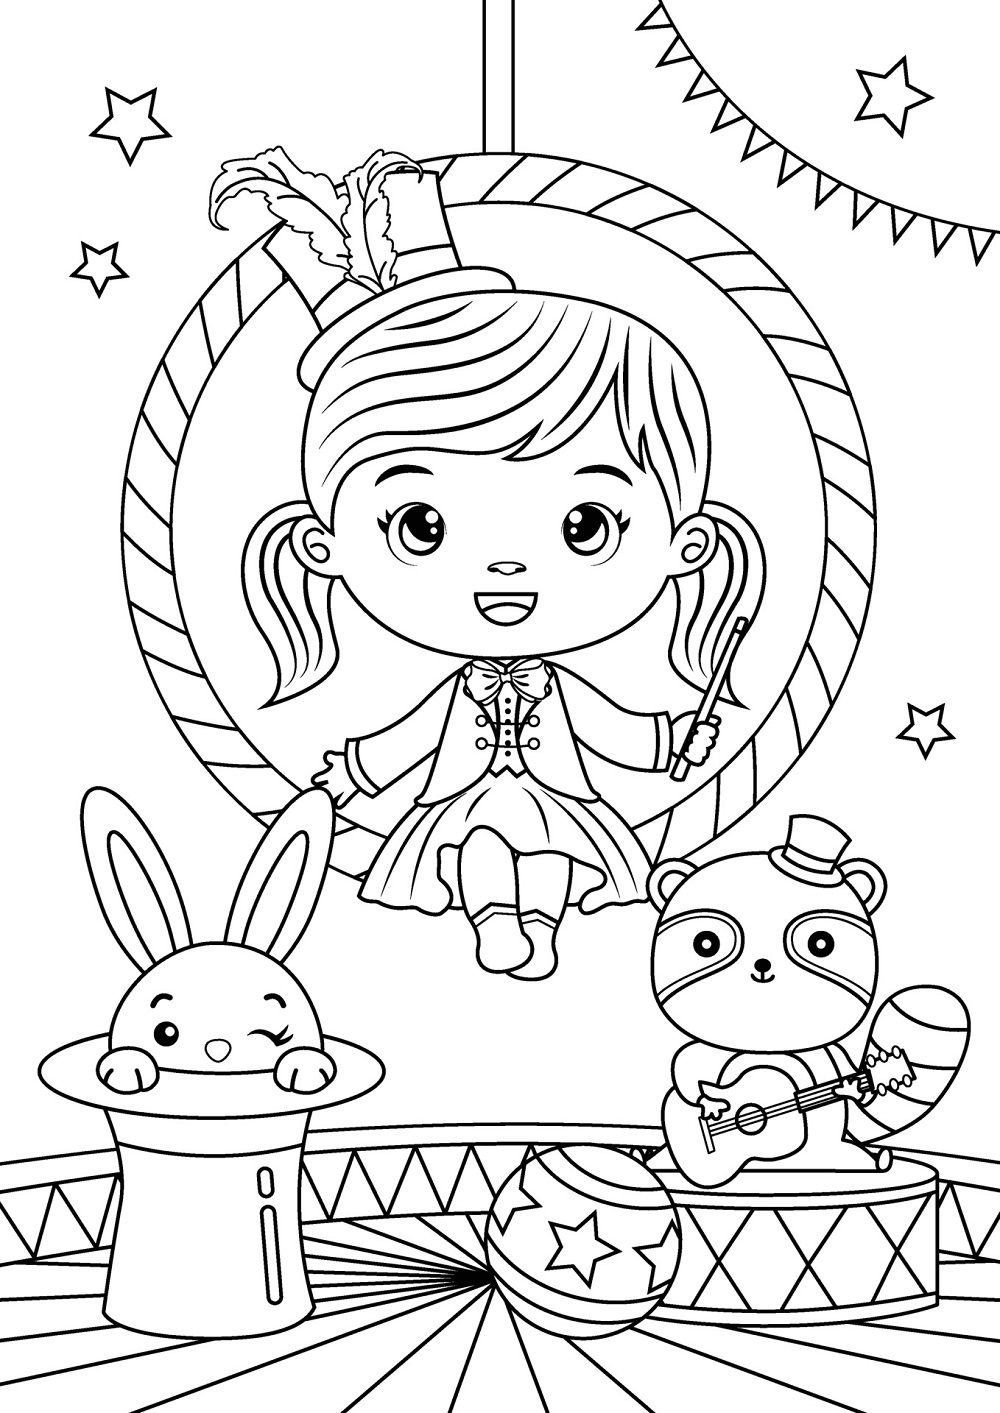 Toys and Dolls Coloring Pages Online For Kids!